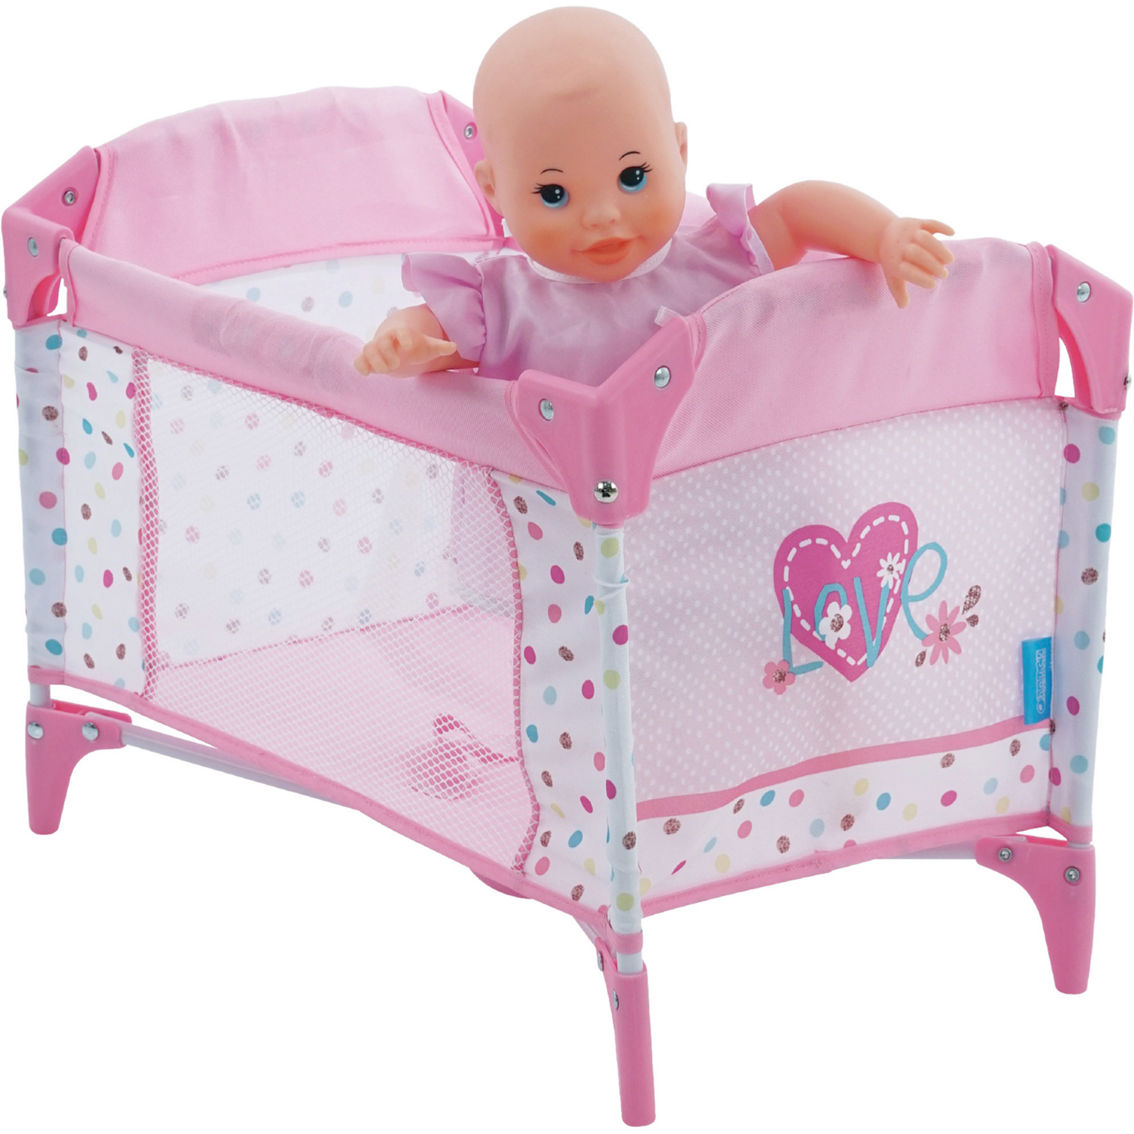 Love Heart Doll Play Yard Baby Doll Accessory - Image 3 of 5